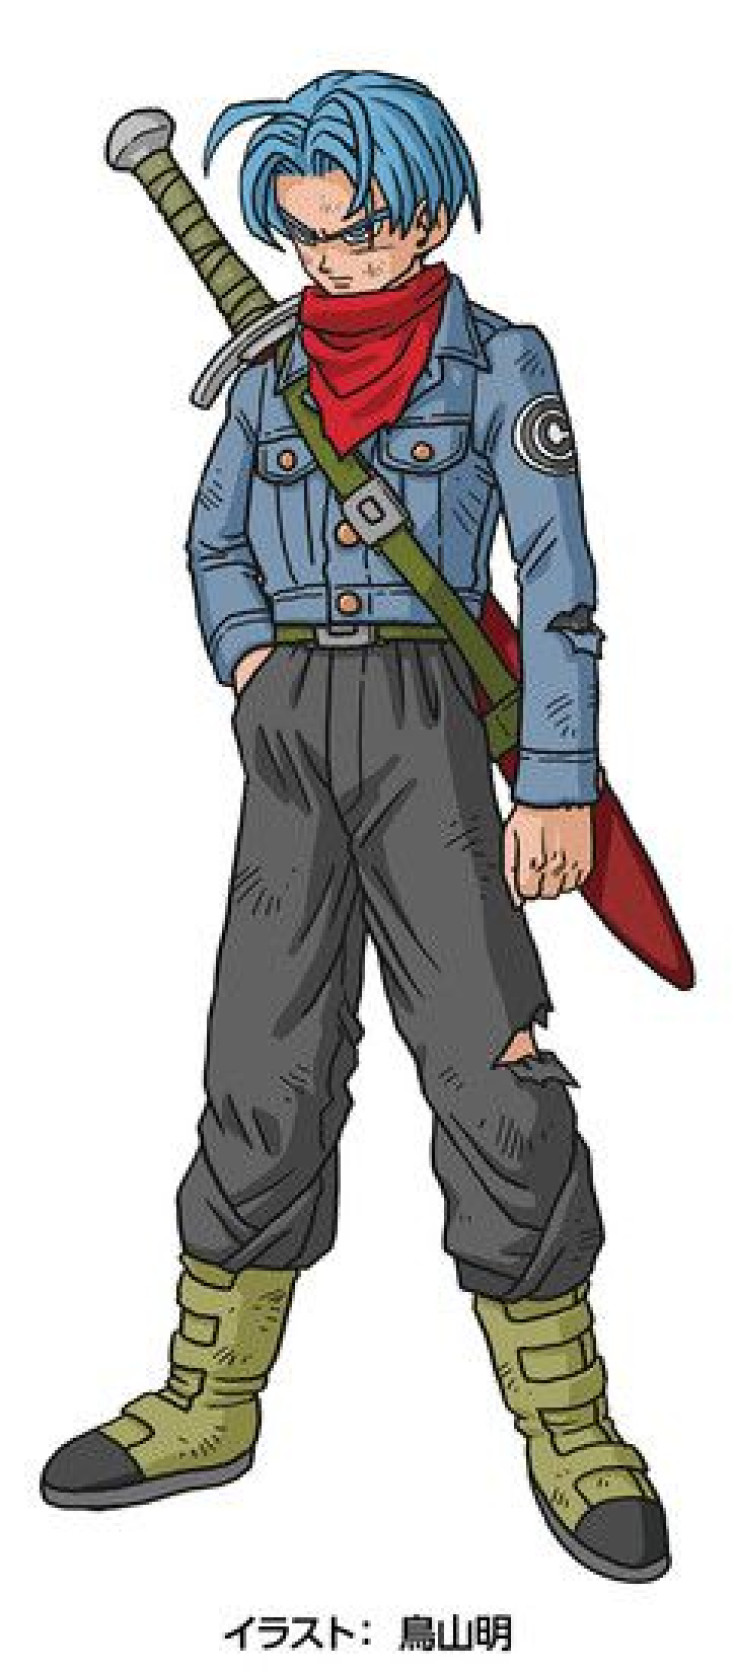 Future Trunks in the upcoming 'Future Trunks' arc